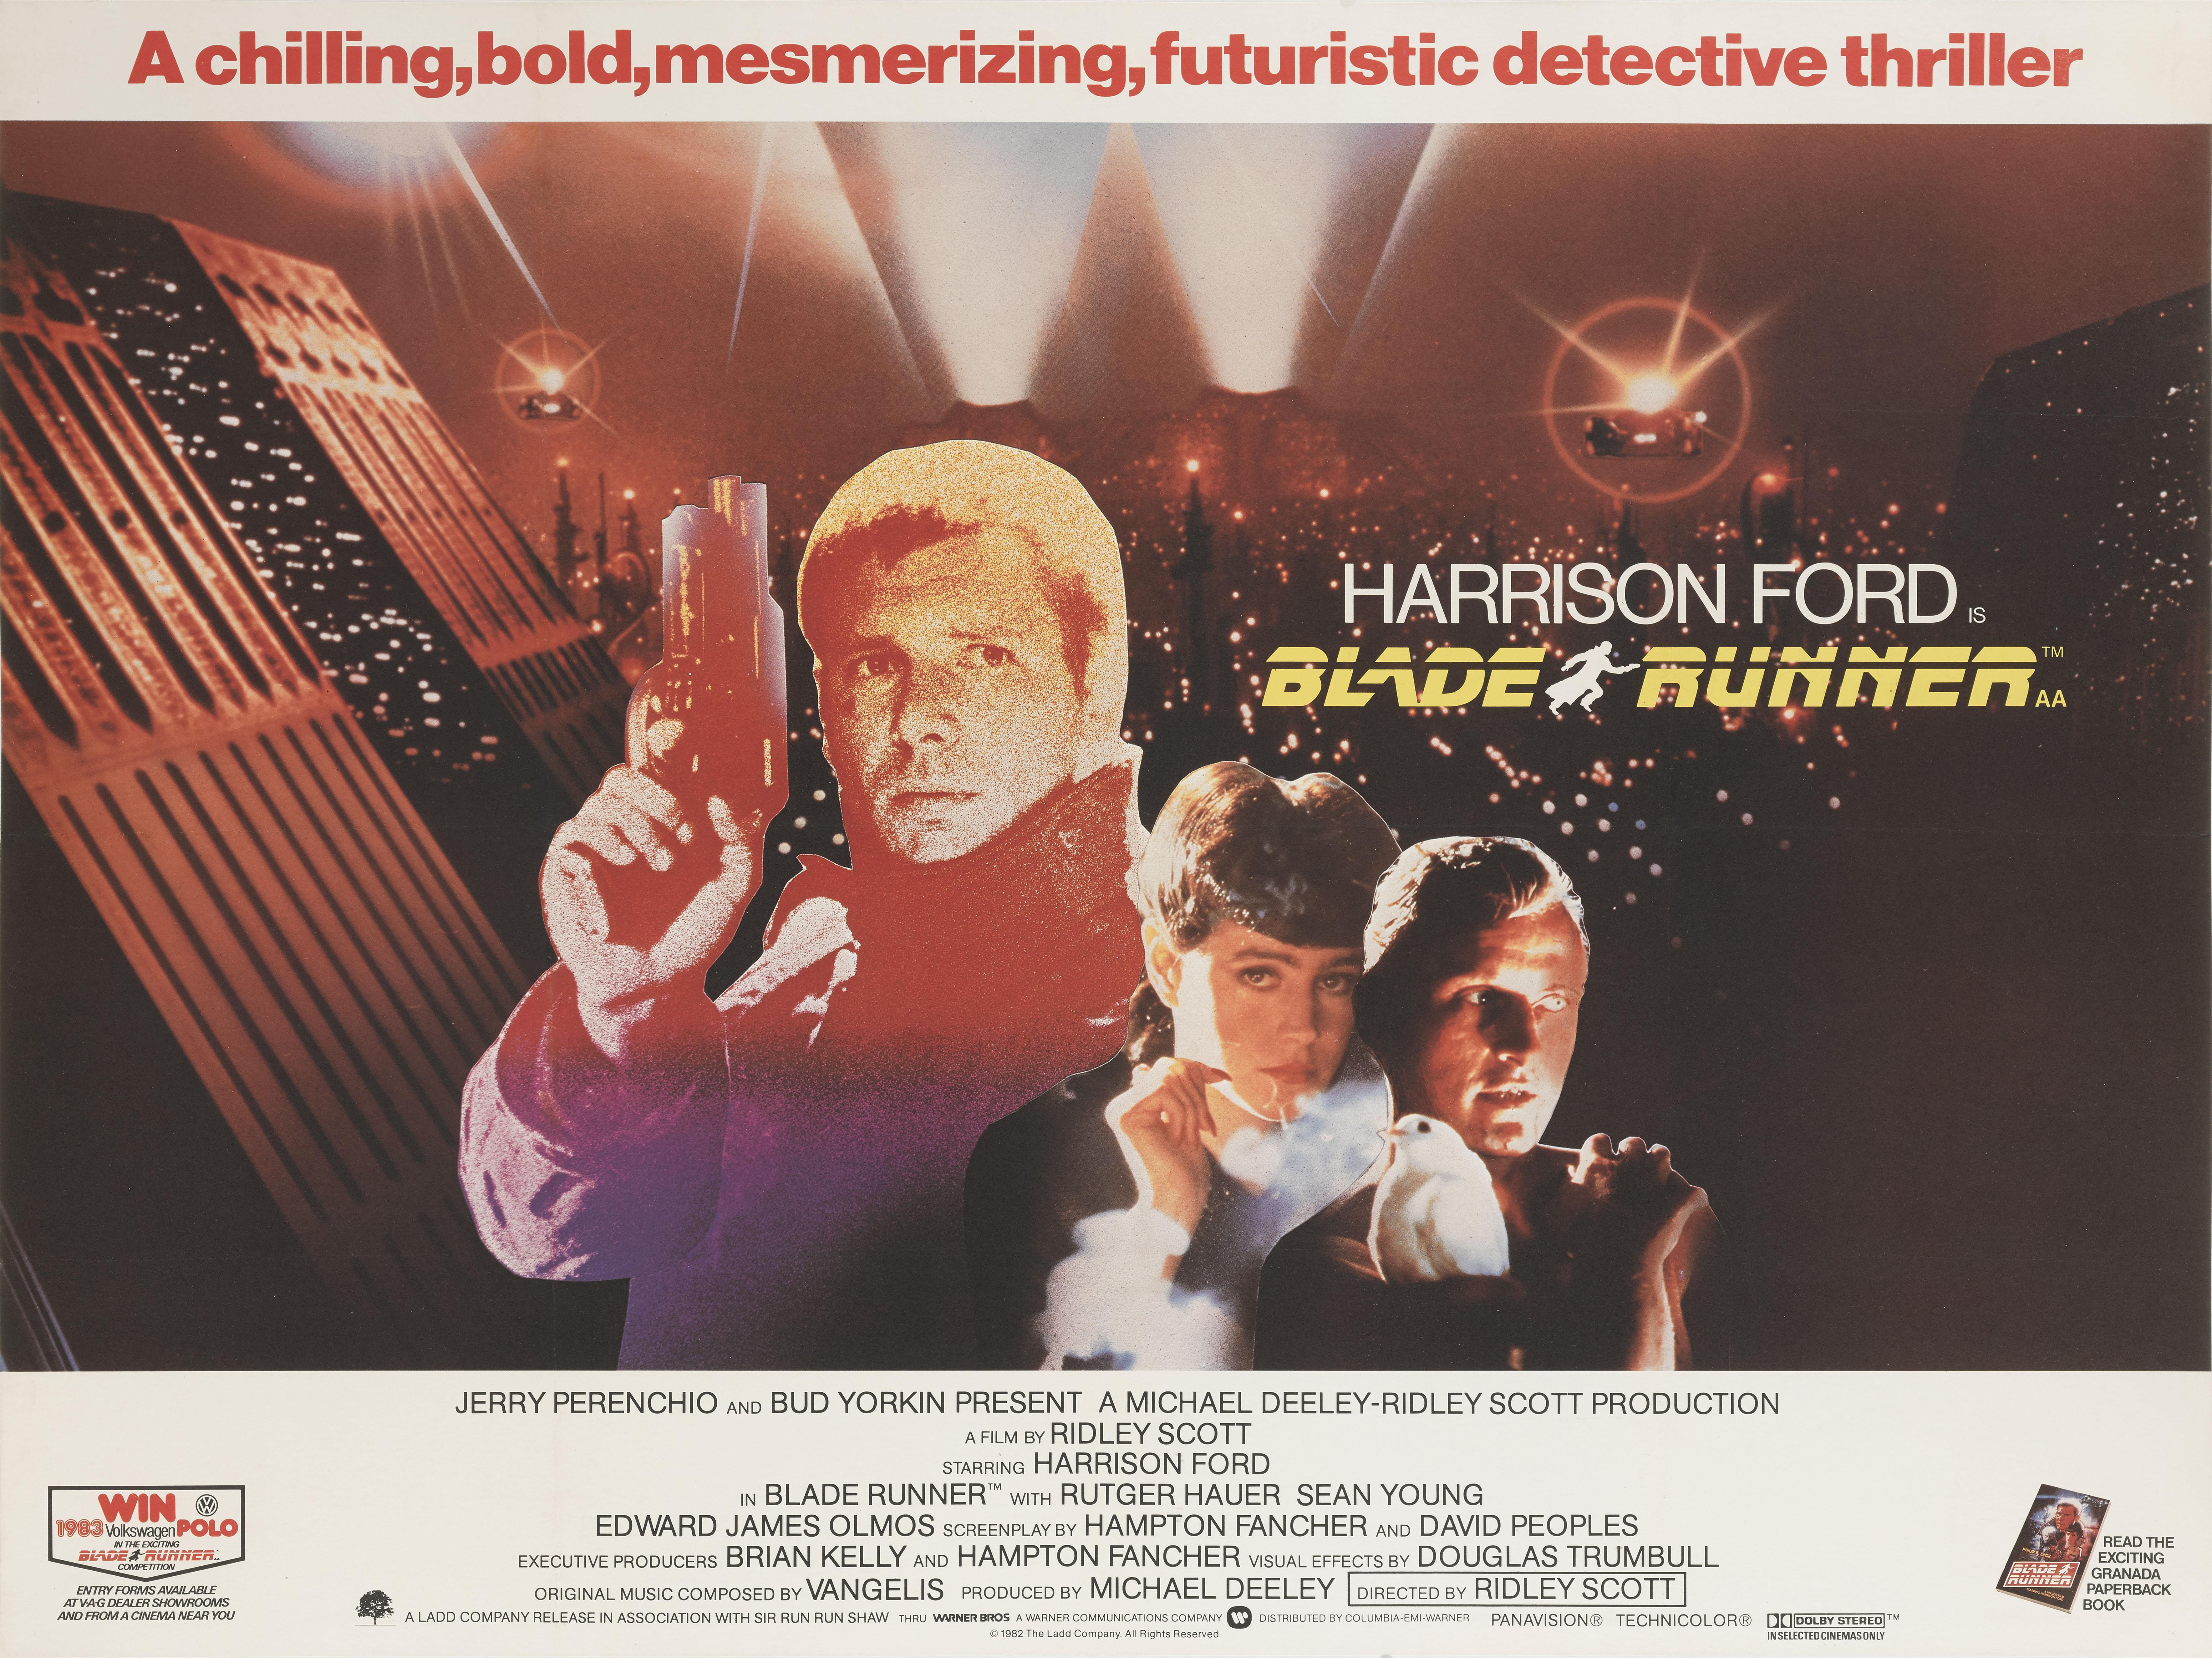 Original British film poster for the cult 1982 science fiction film
starringHarrison Ford, Rutger Hauer and Sean Young. The film was directed by Ridley Scott.
This poster is conservation linen backed and would be shipped rolled in a strong tube and